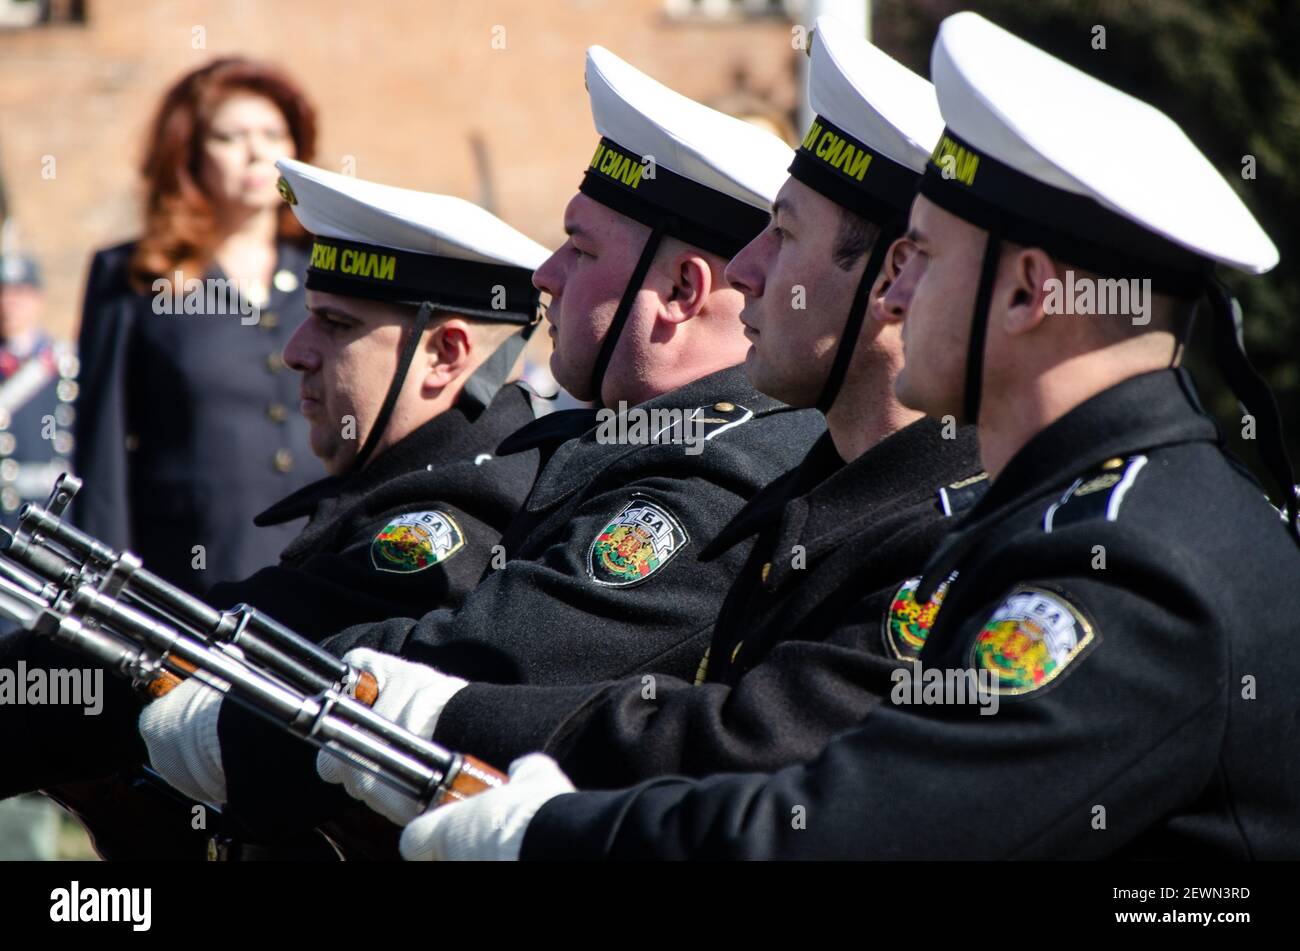 3 of March 2021, Sofia, Bulgaria. The Vice President of Bulgaria Iliana Yotova in front the military parade on the occasion of March 3 - the national holiday of the country. Stock Photo